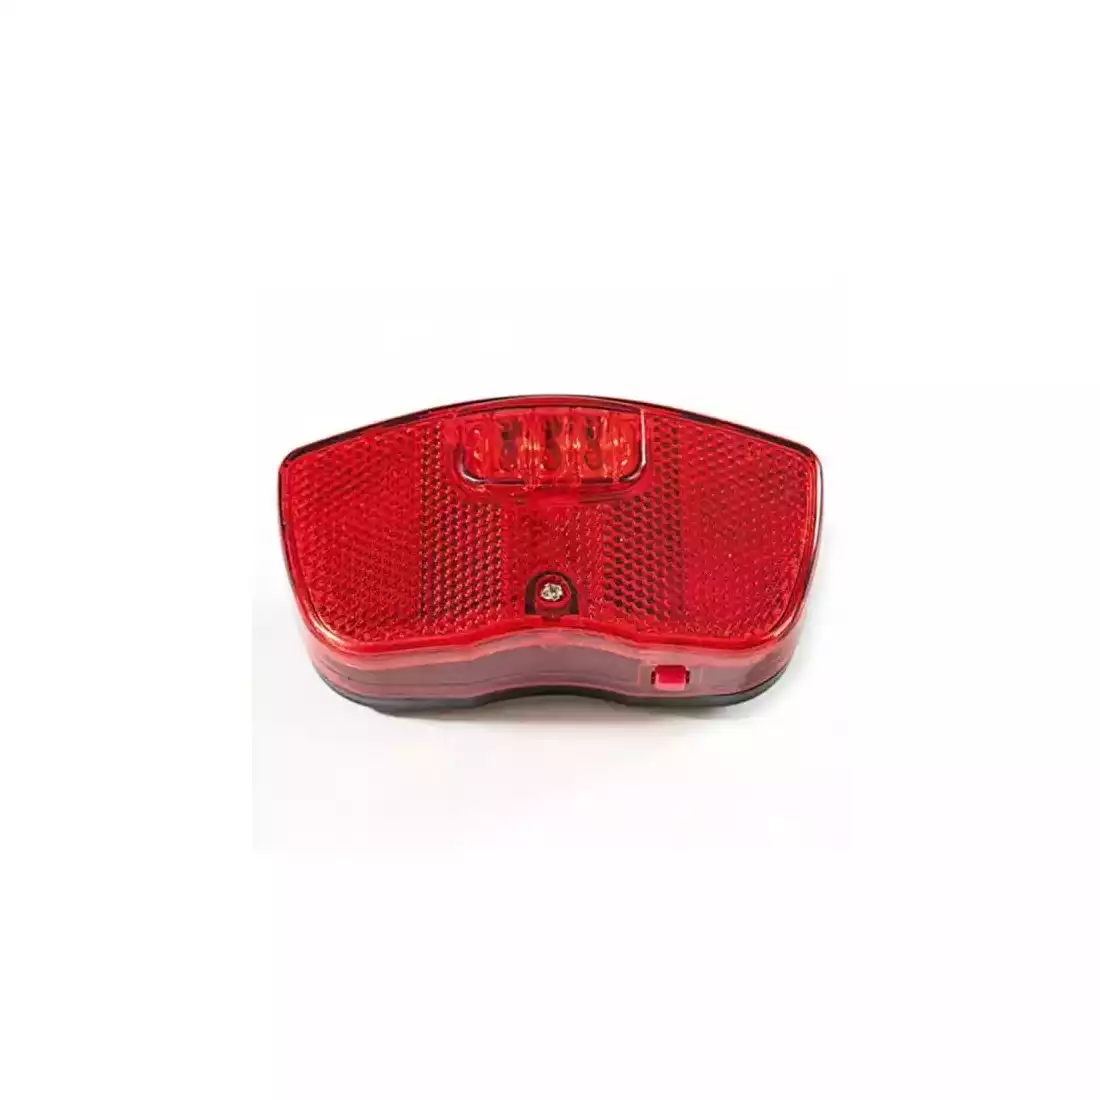 OEM rear bicycle lamp diode/battery, red